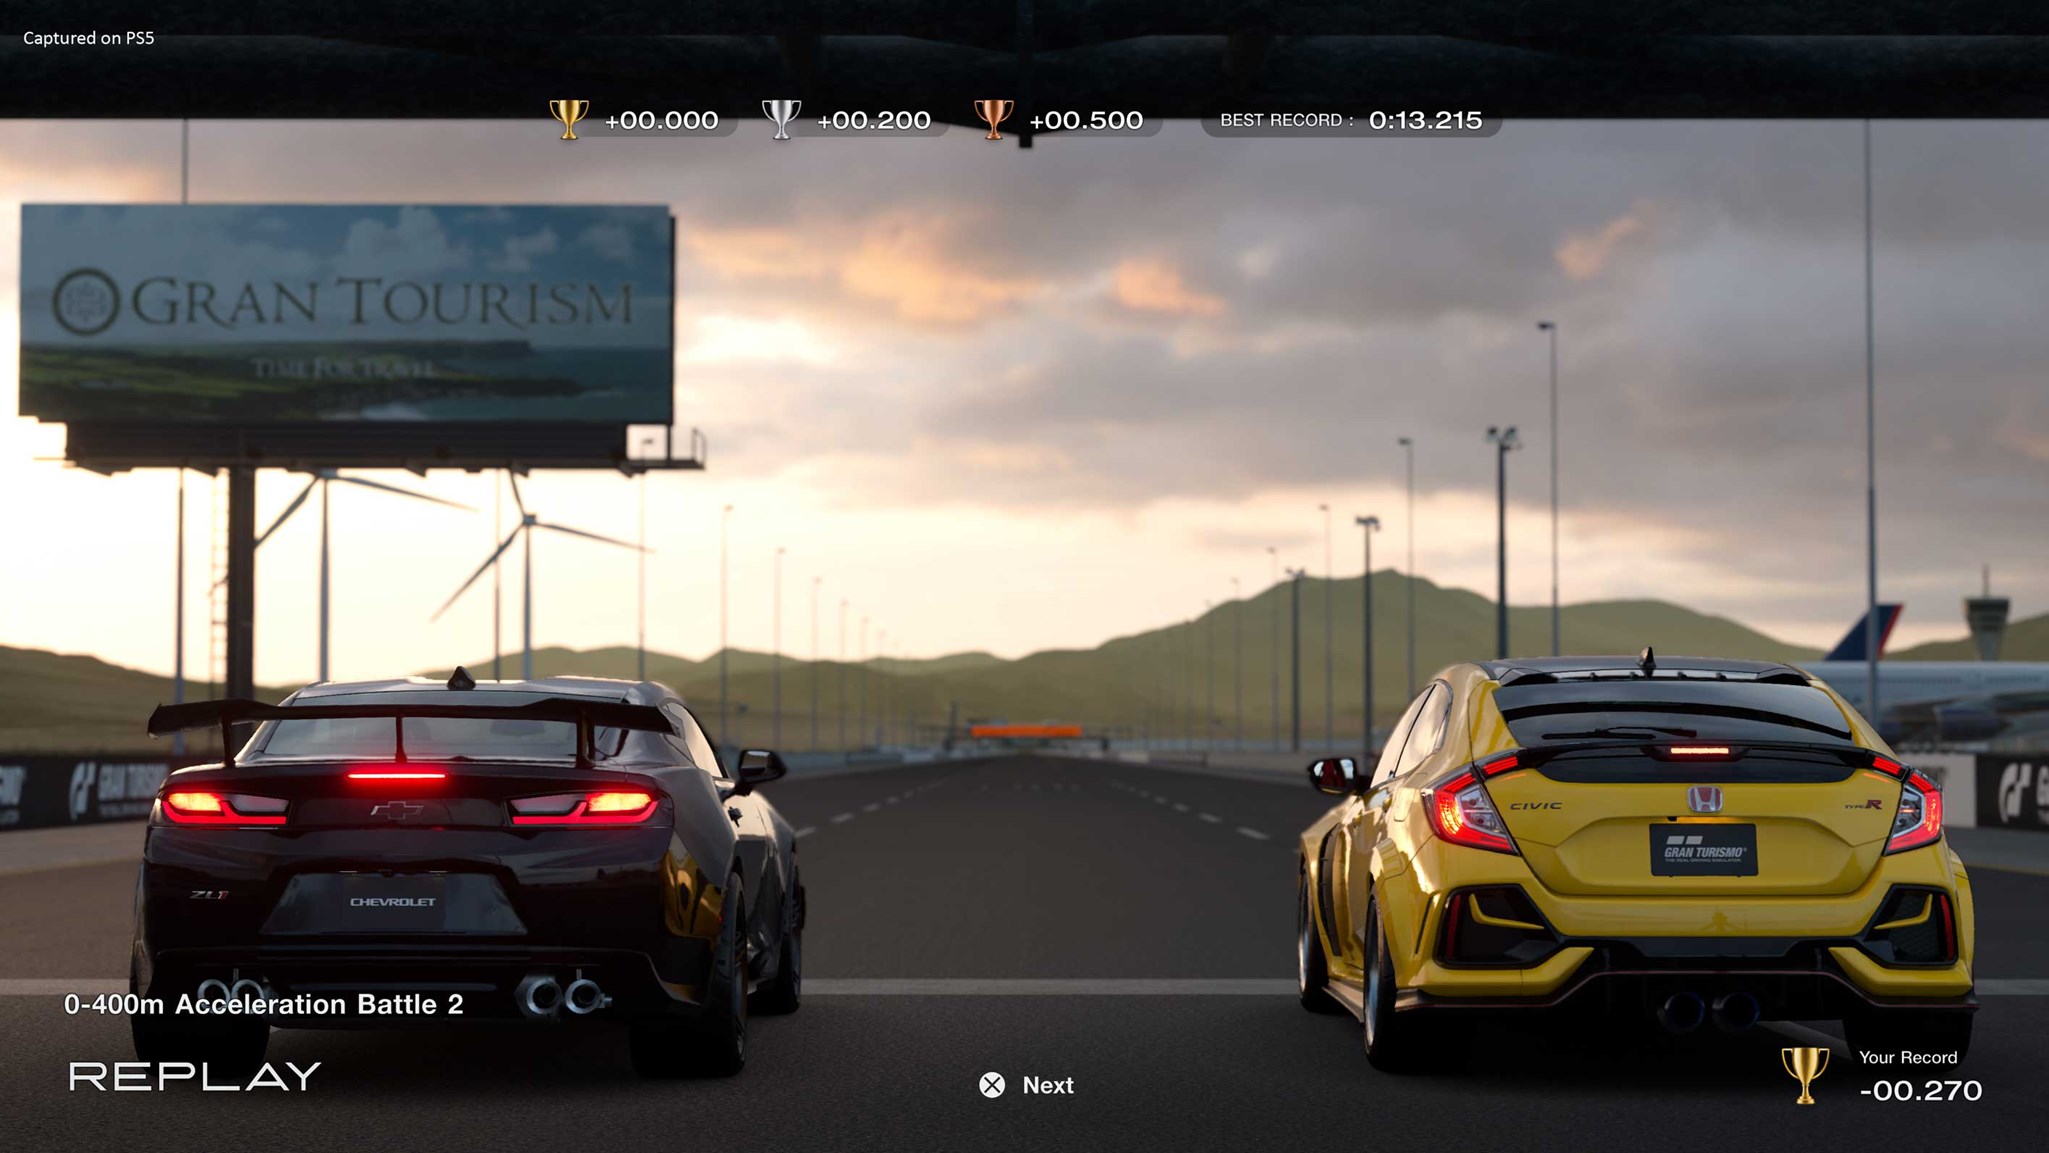 Gran Turismo 7' comes to PS4 and PS5 on March 4th, 2022